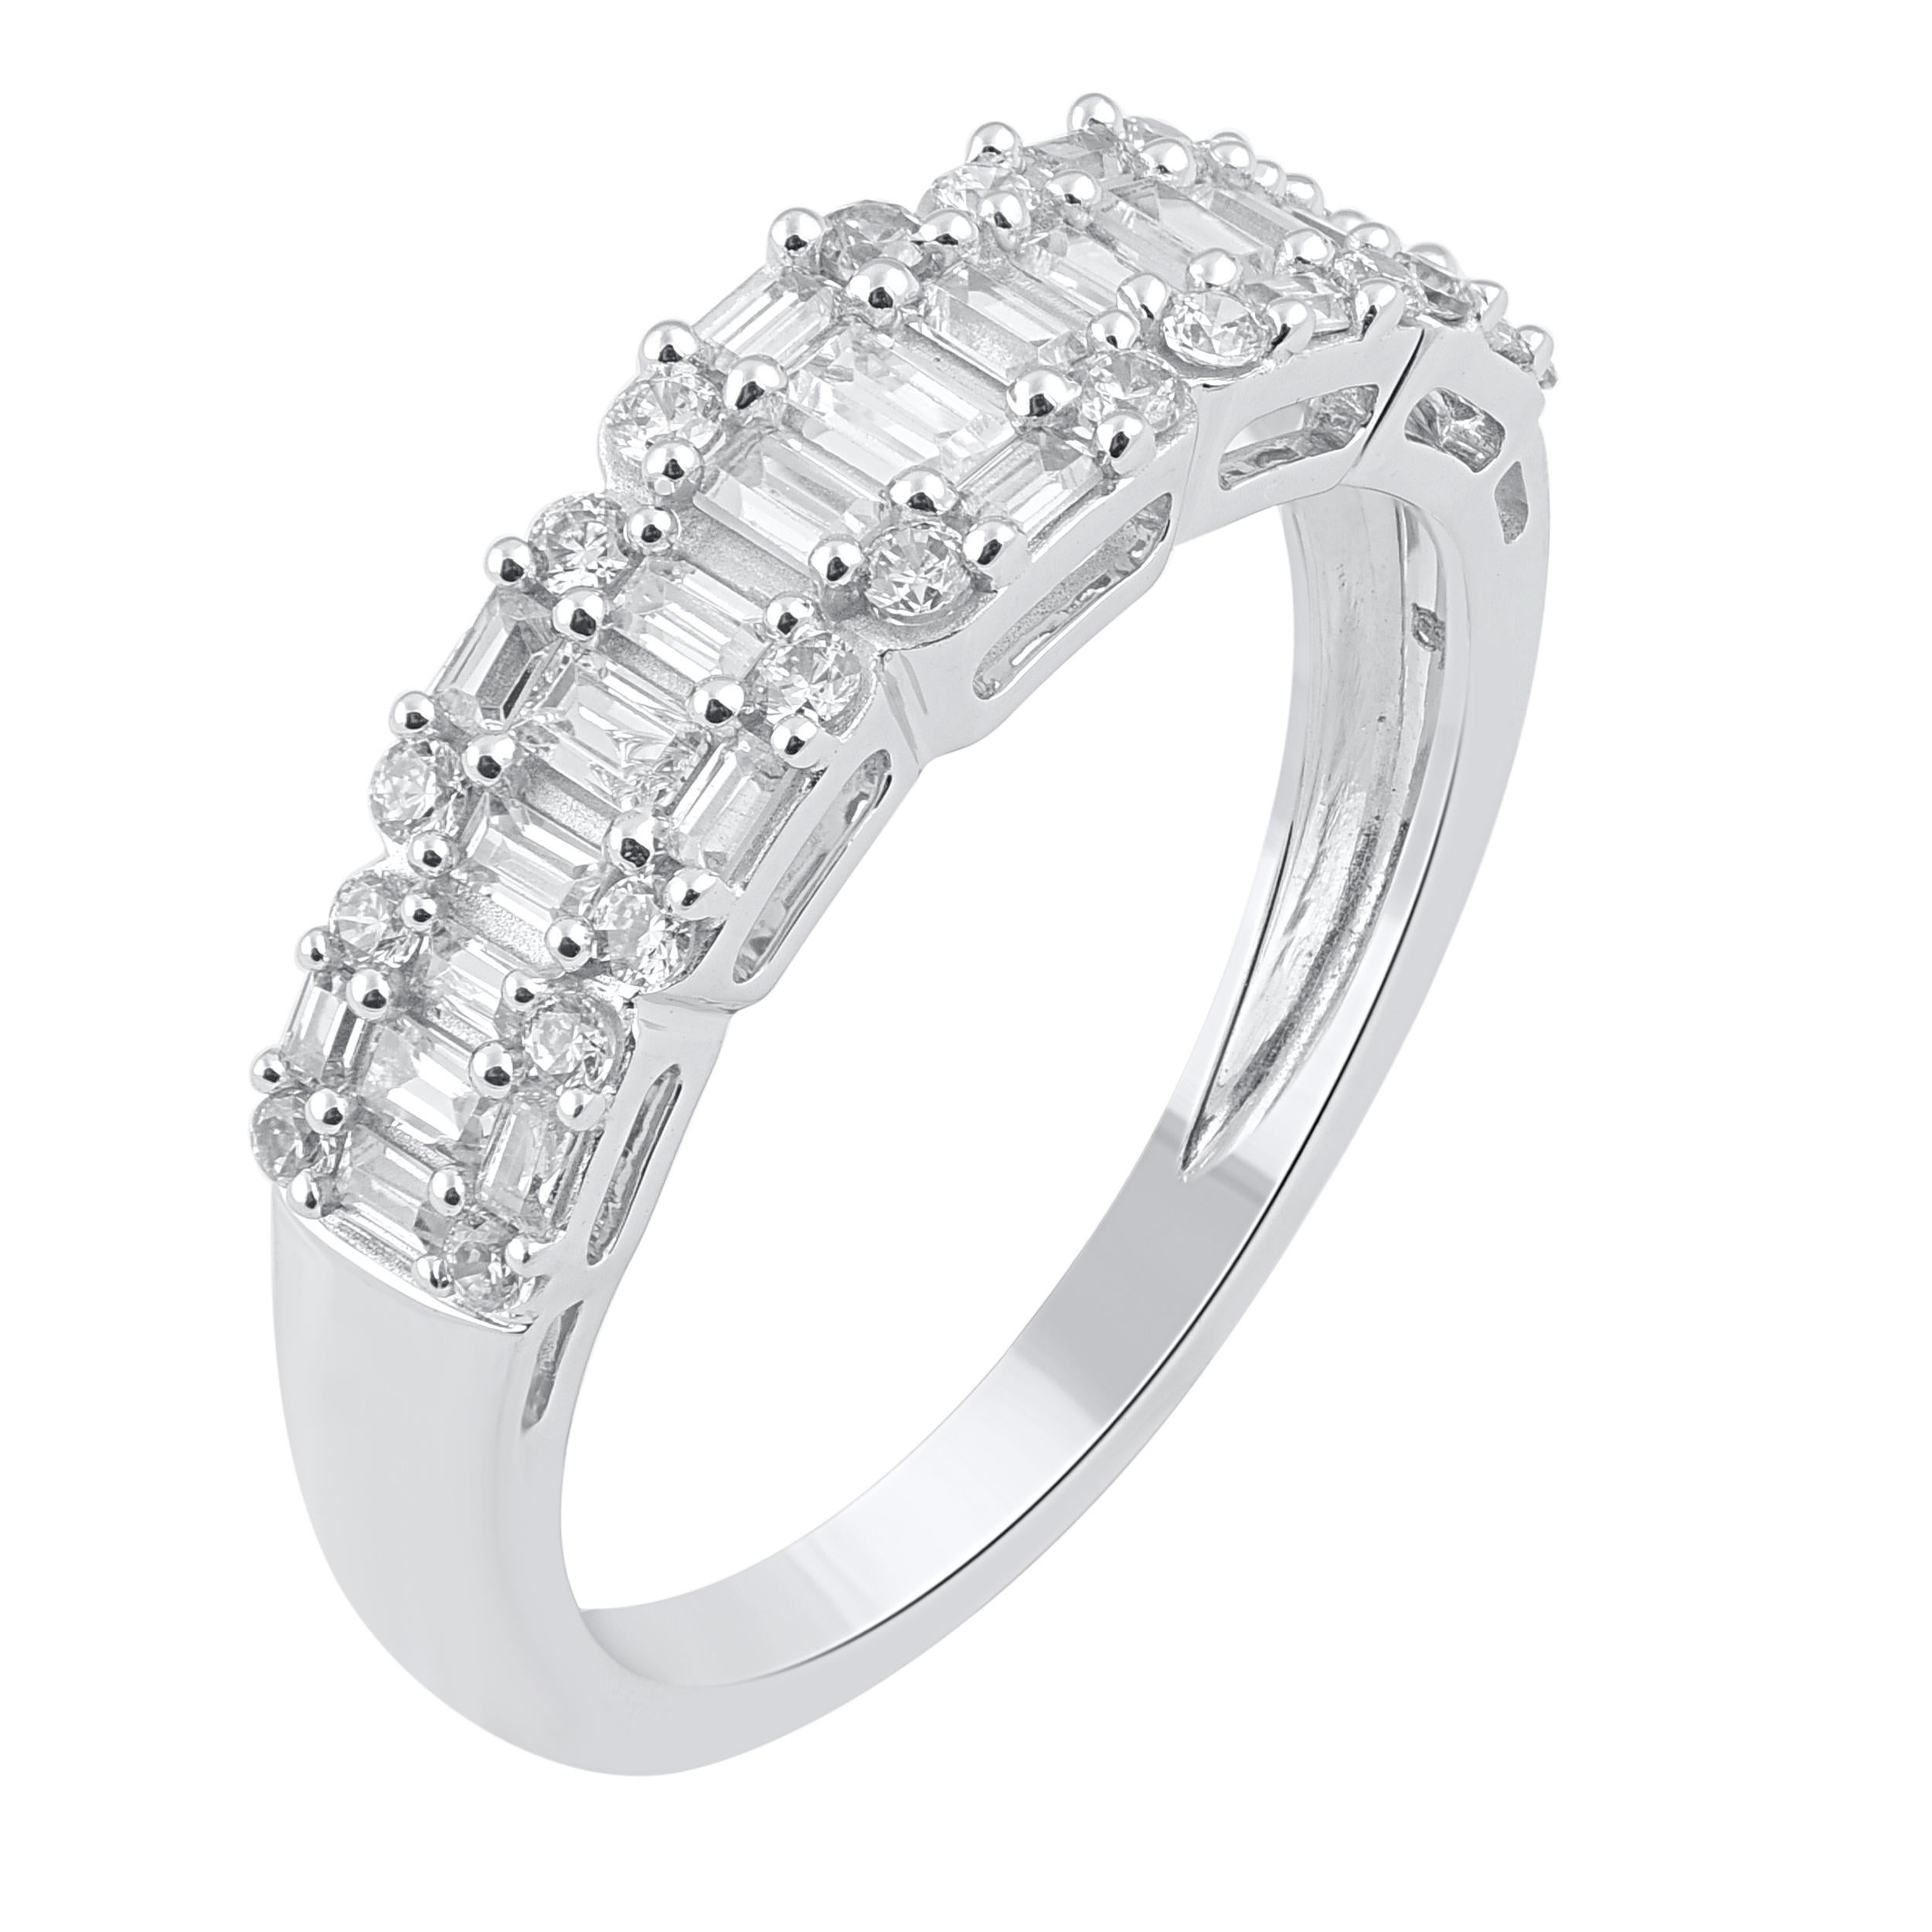 Modern and mesmerizing, these wedding band diamond ring are an eye catchy look for any occasion. Embedded with 45 brilliant cut round diamonds and baguette diamonds set in prong setting and crafted in 18 karat white gold. Captivating with 1.0 carat